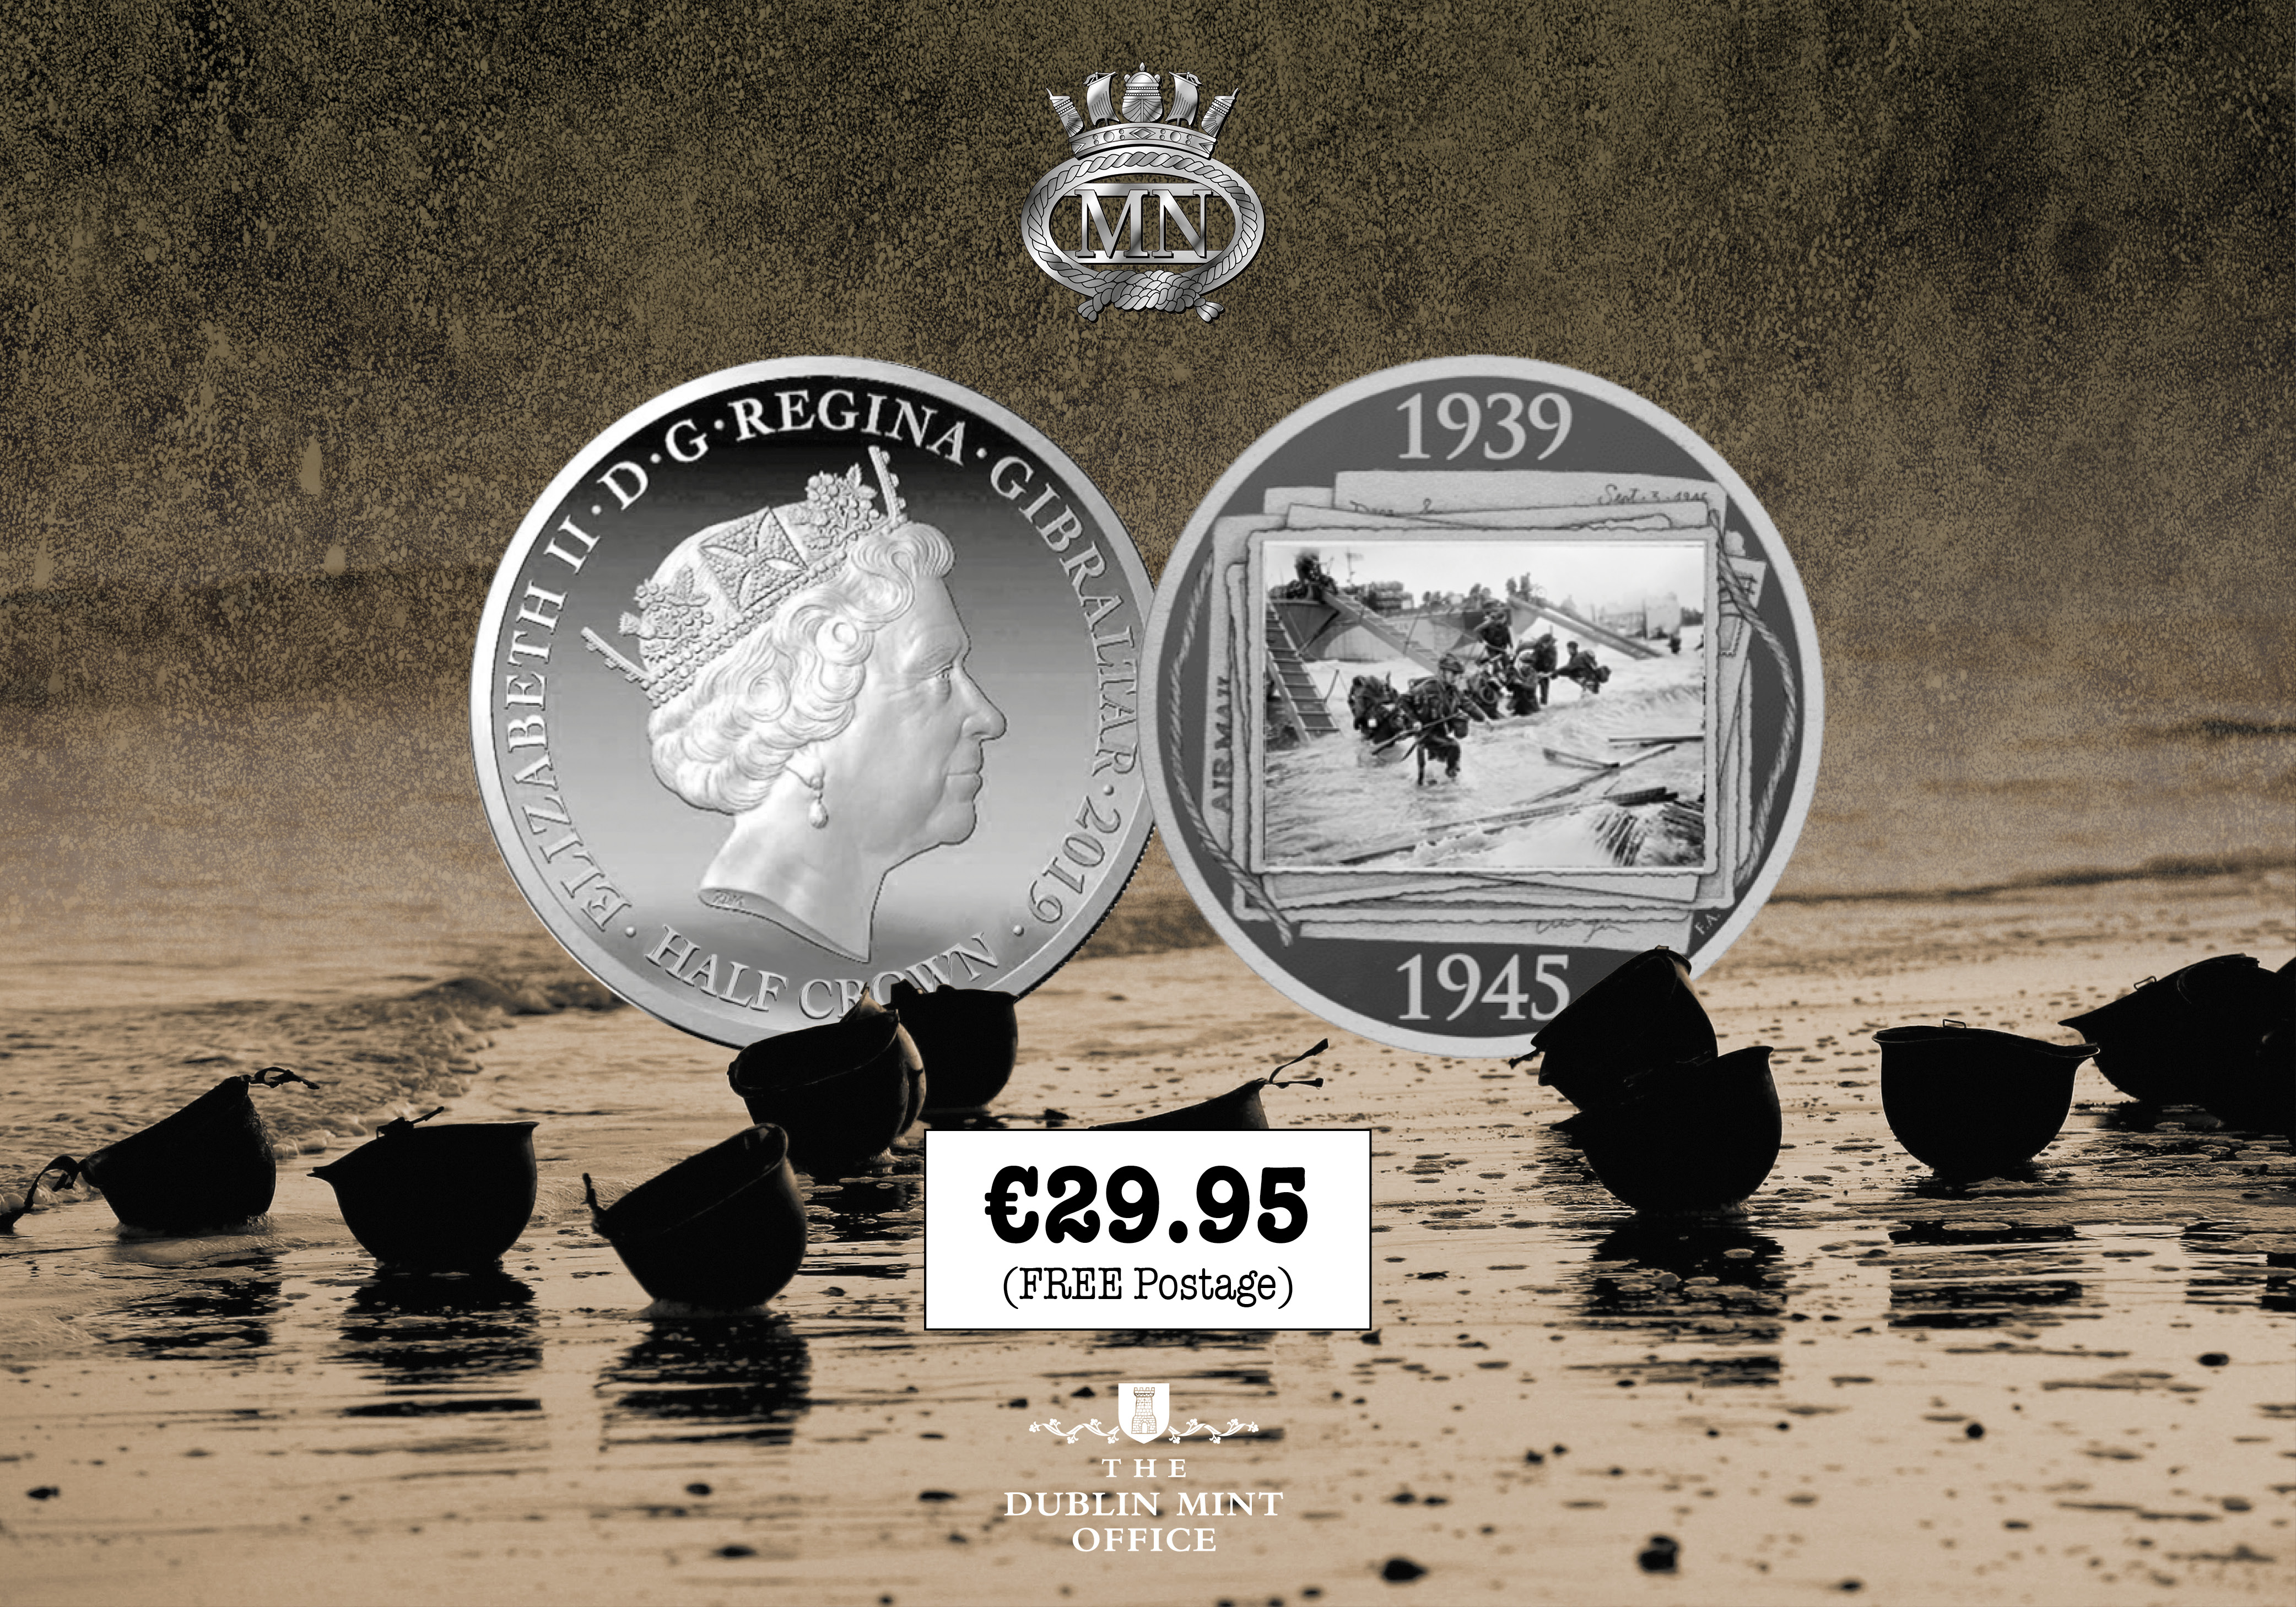 The Official D-Day 75th Anniversary coin - in Partnership with the Merchant Navy Association